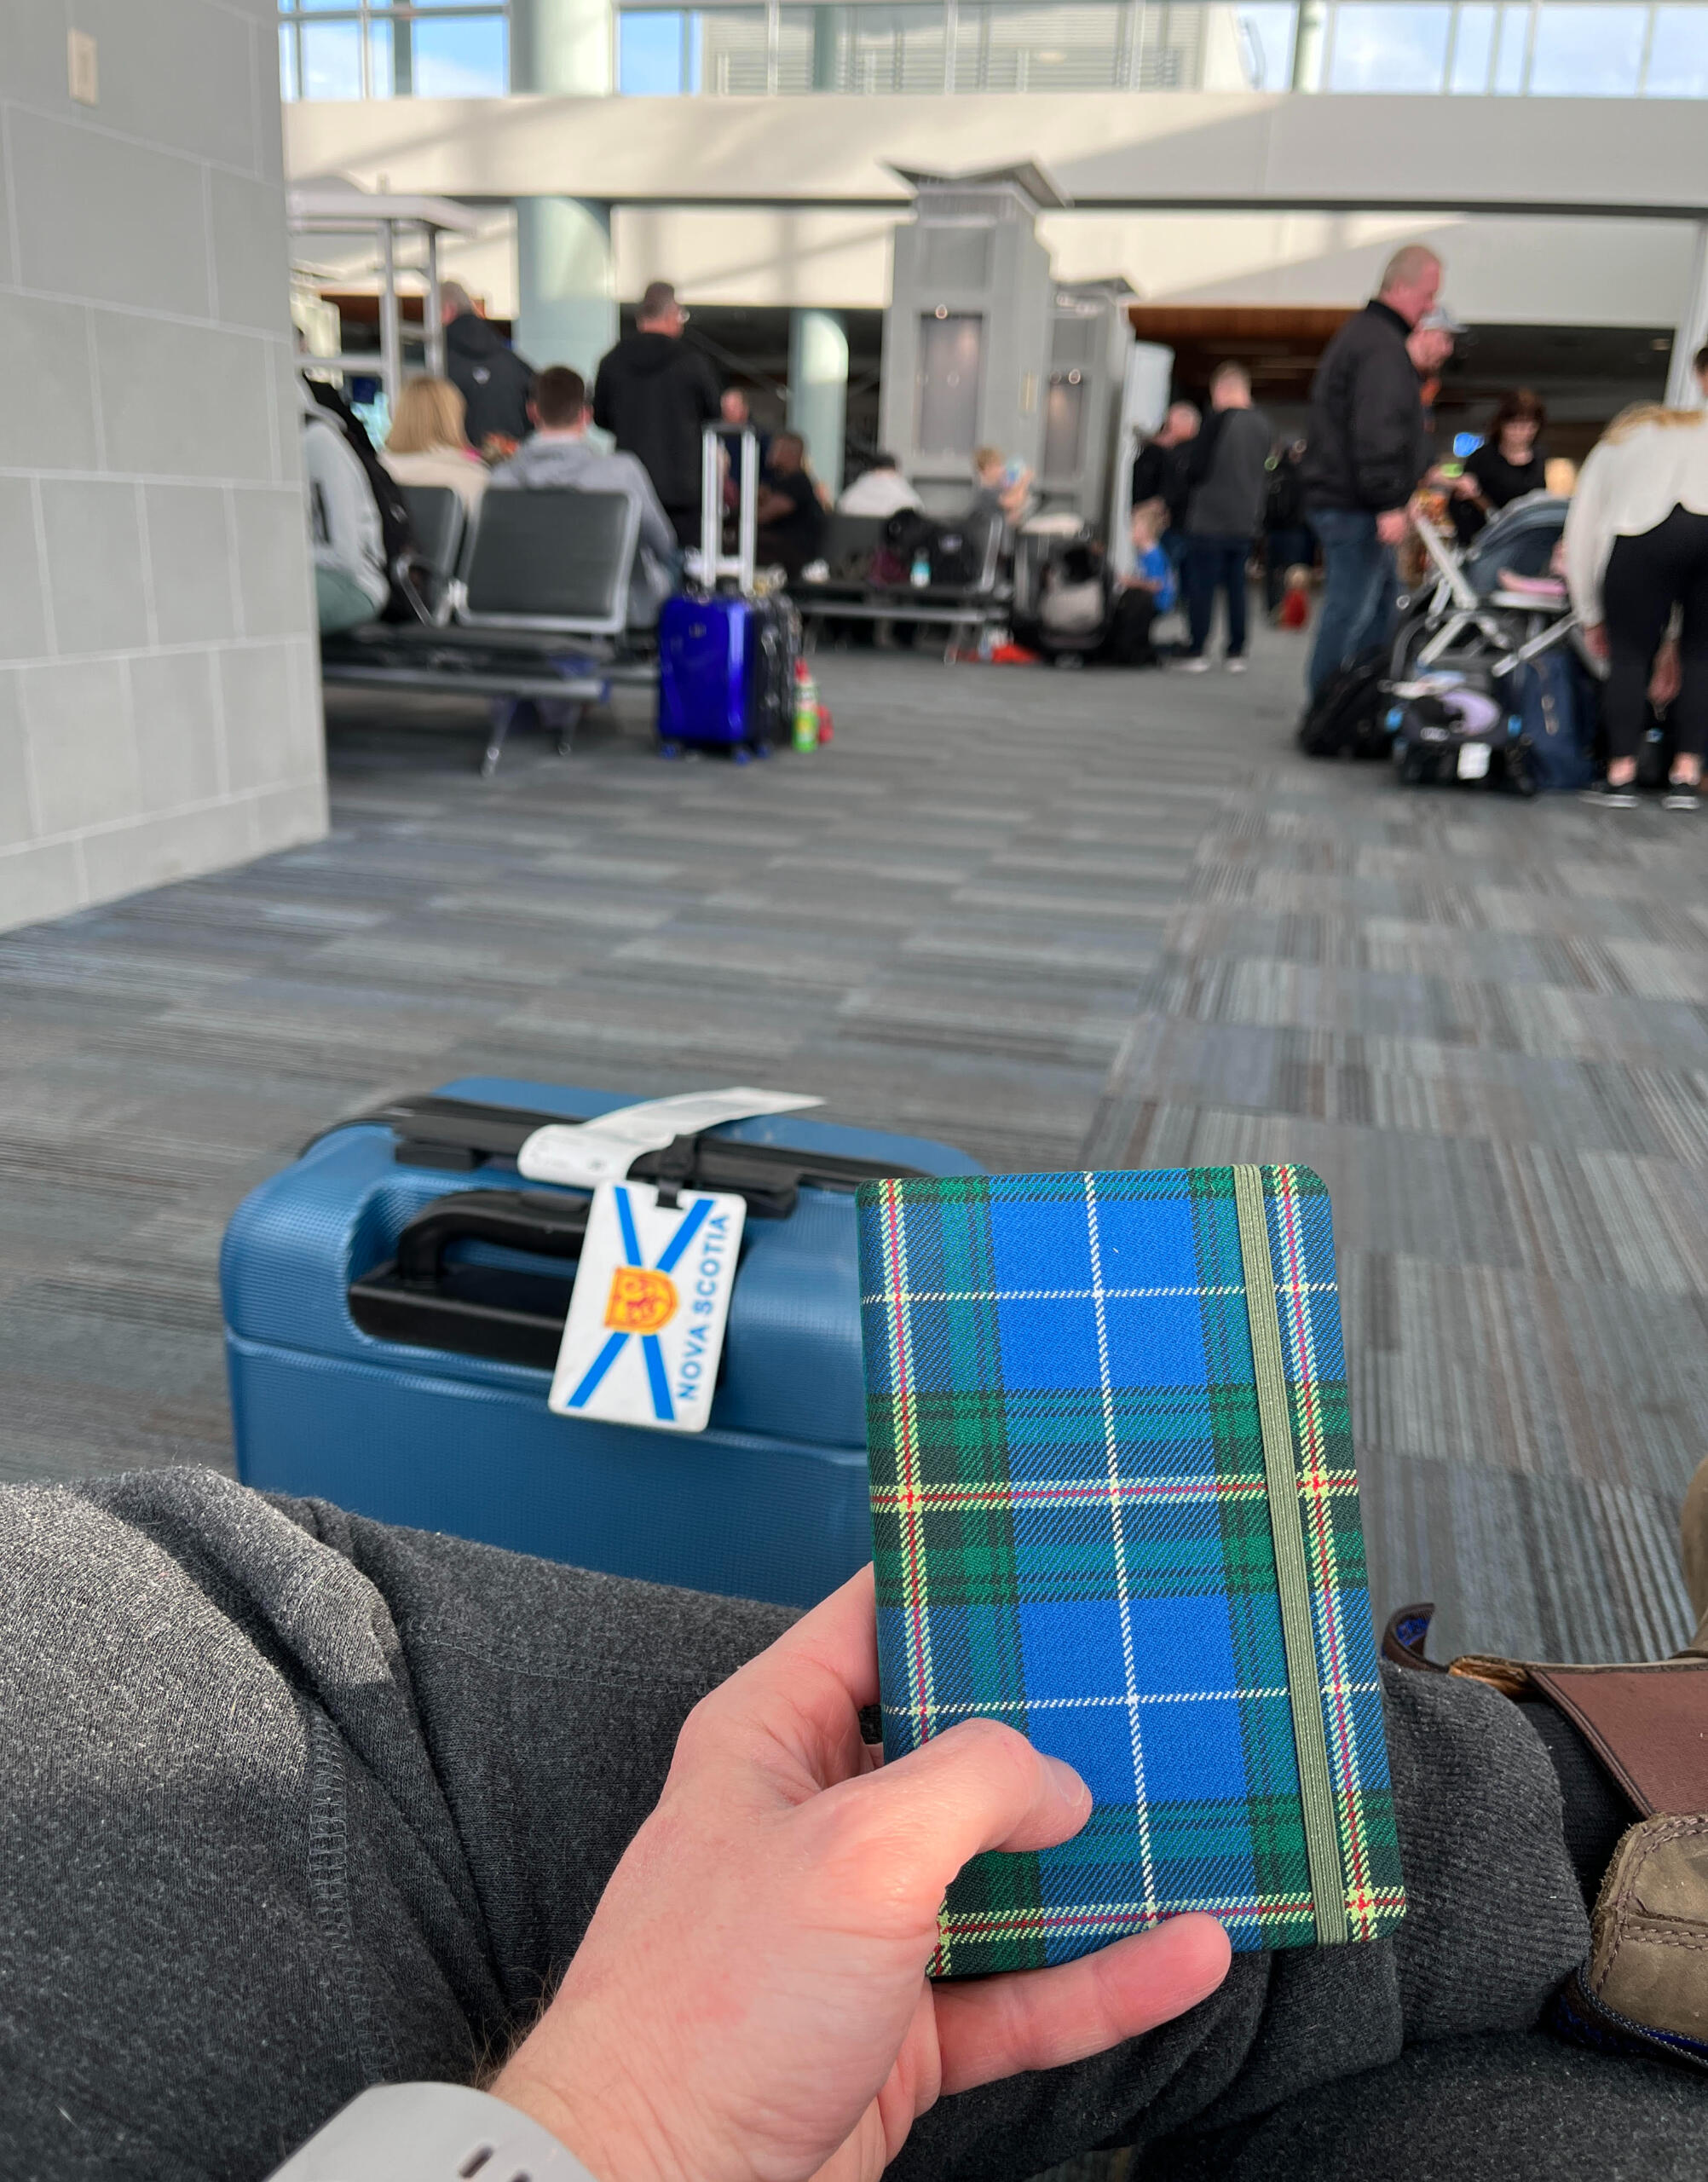 Photo is a first person perspective. The photographer is sitting in an airport and in the foreground of the photo, they are holding a small notebook that is patterned in the Nova Scotia tartan. In the mid-ground, is a piece of luggage with a Nova Scotia fl